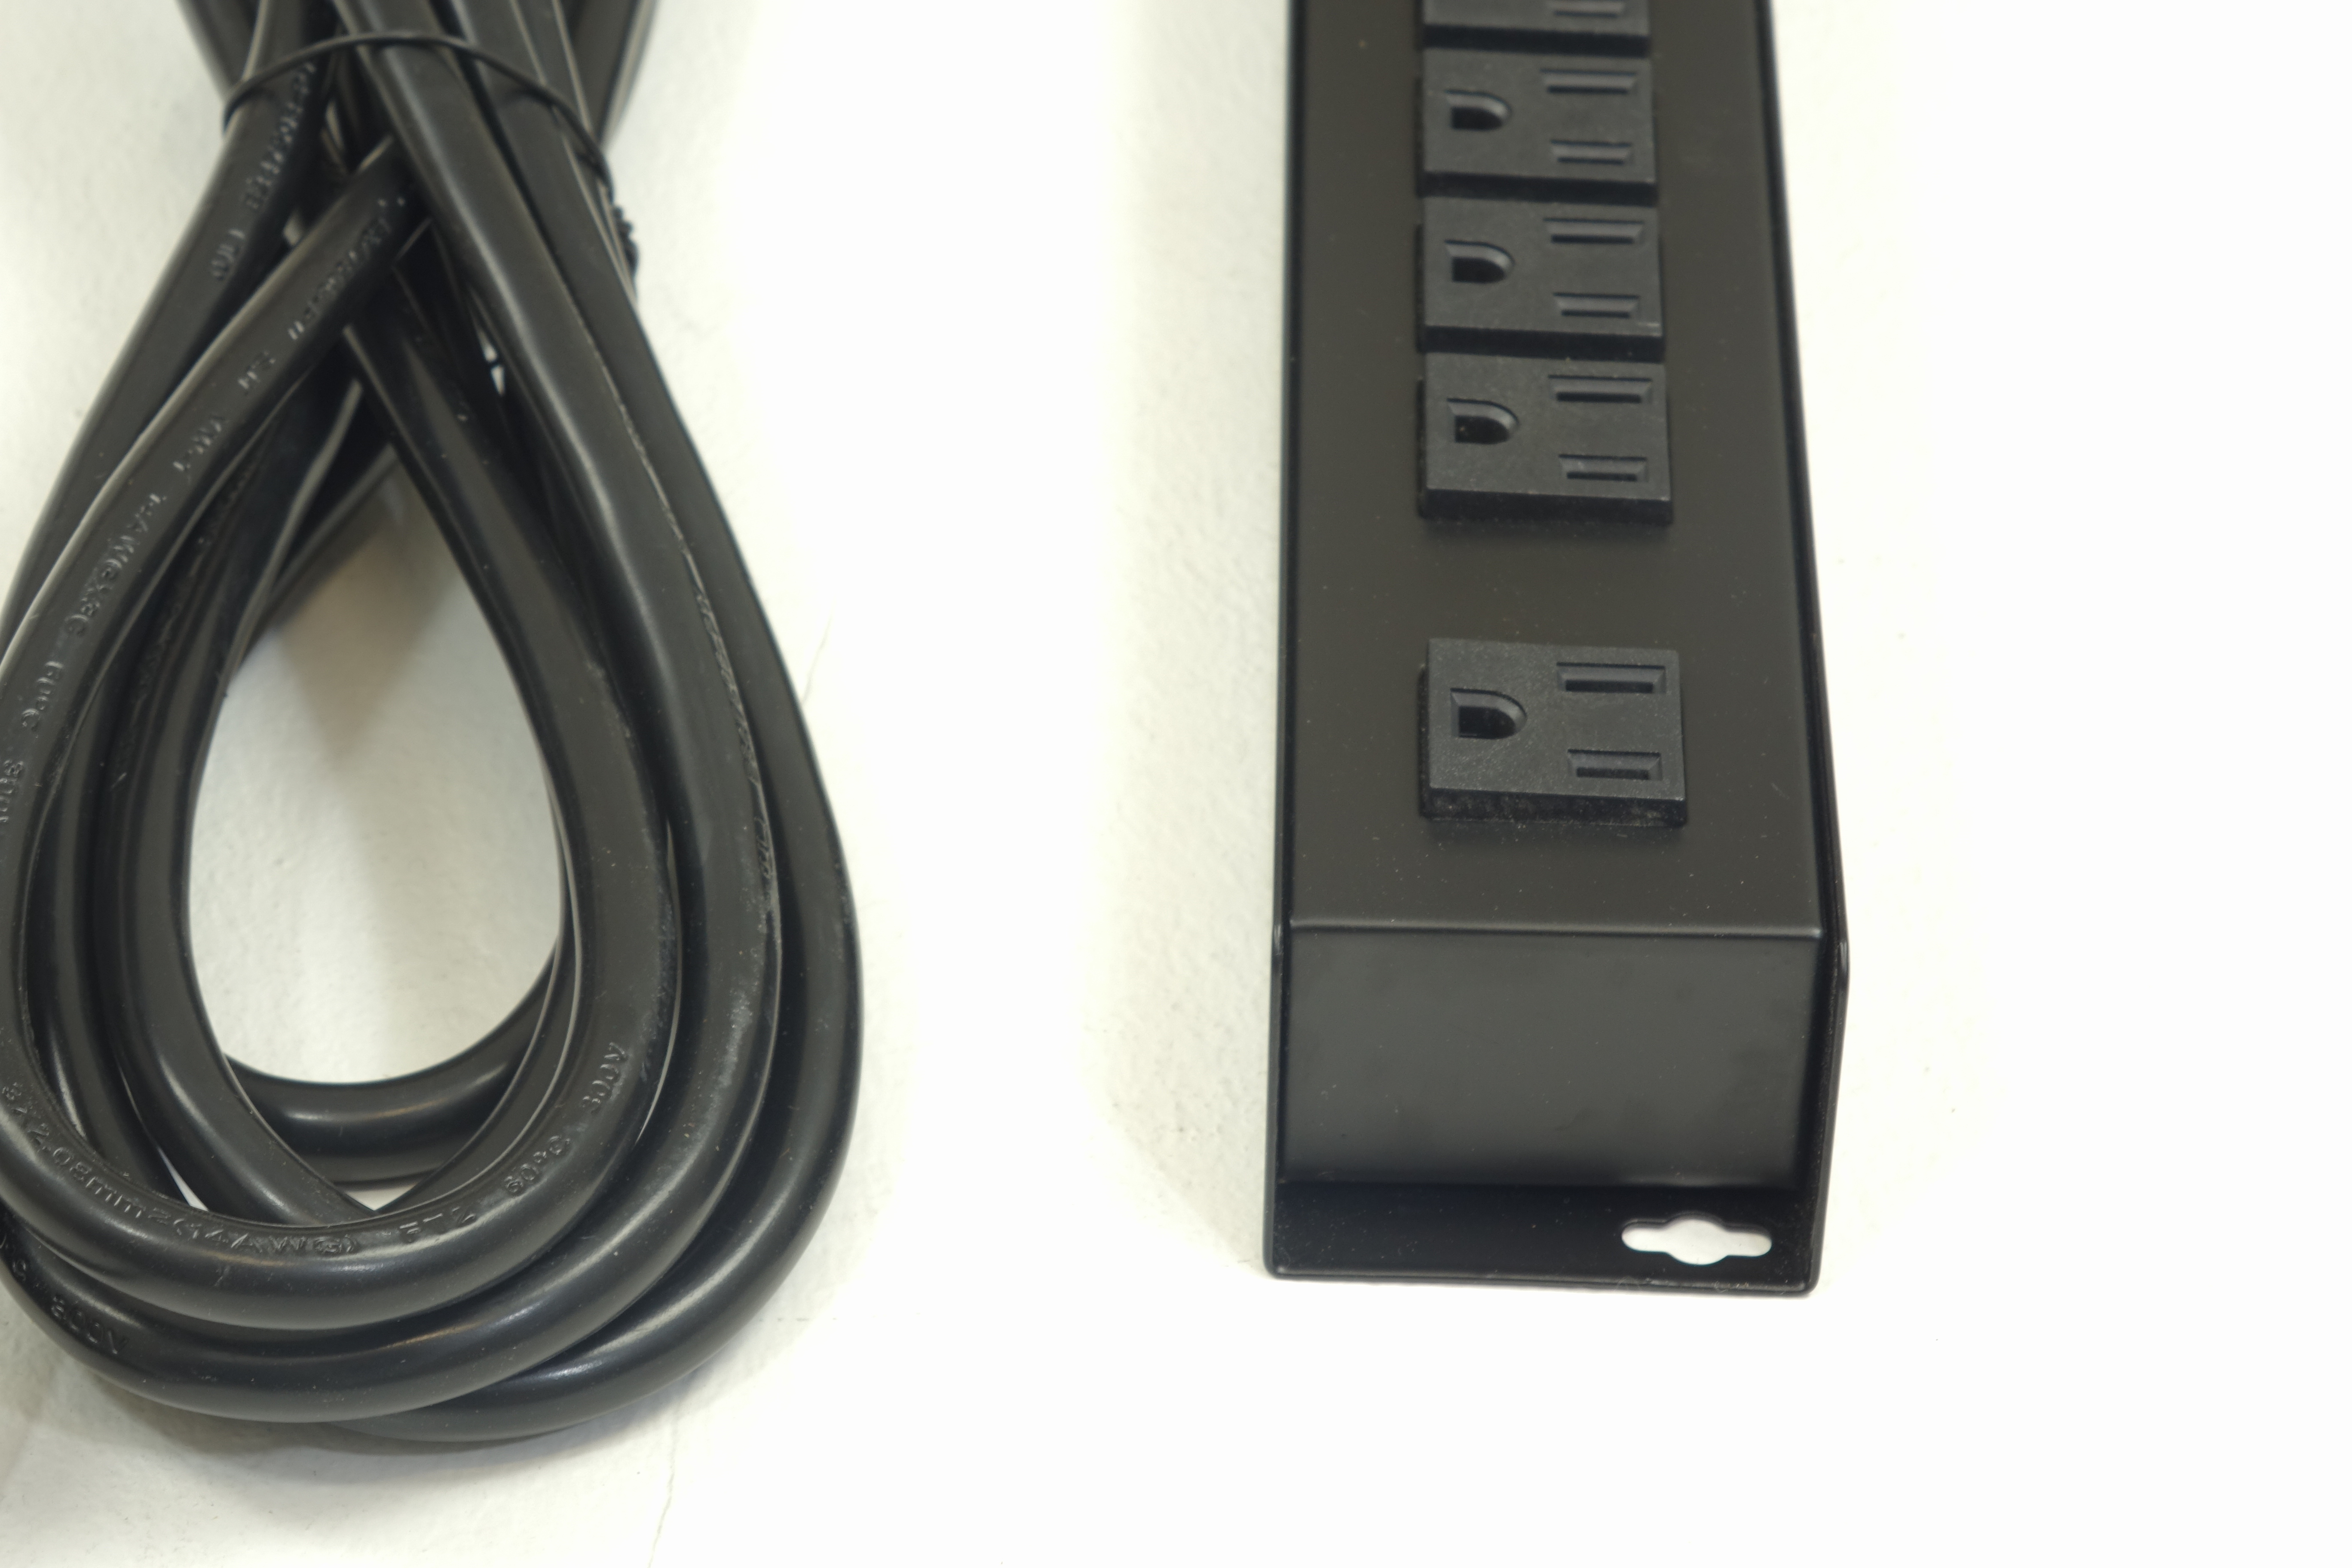 Mountable Power Strip Surge Protector with 6 outlets, ED-SURGE-615